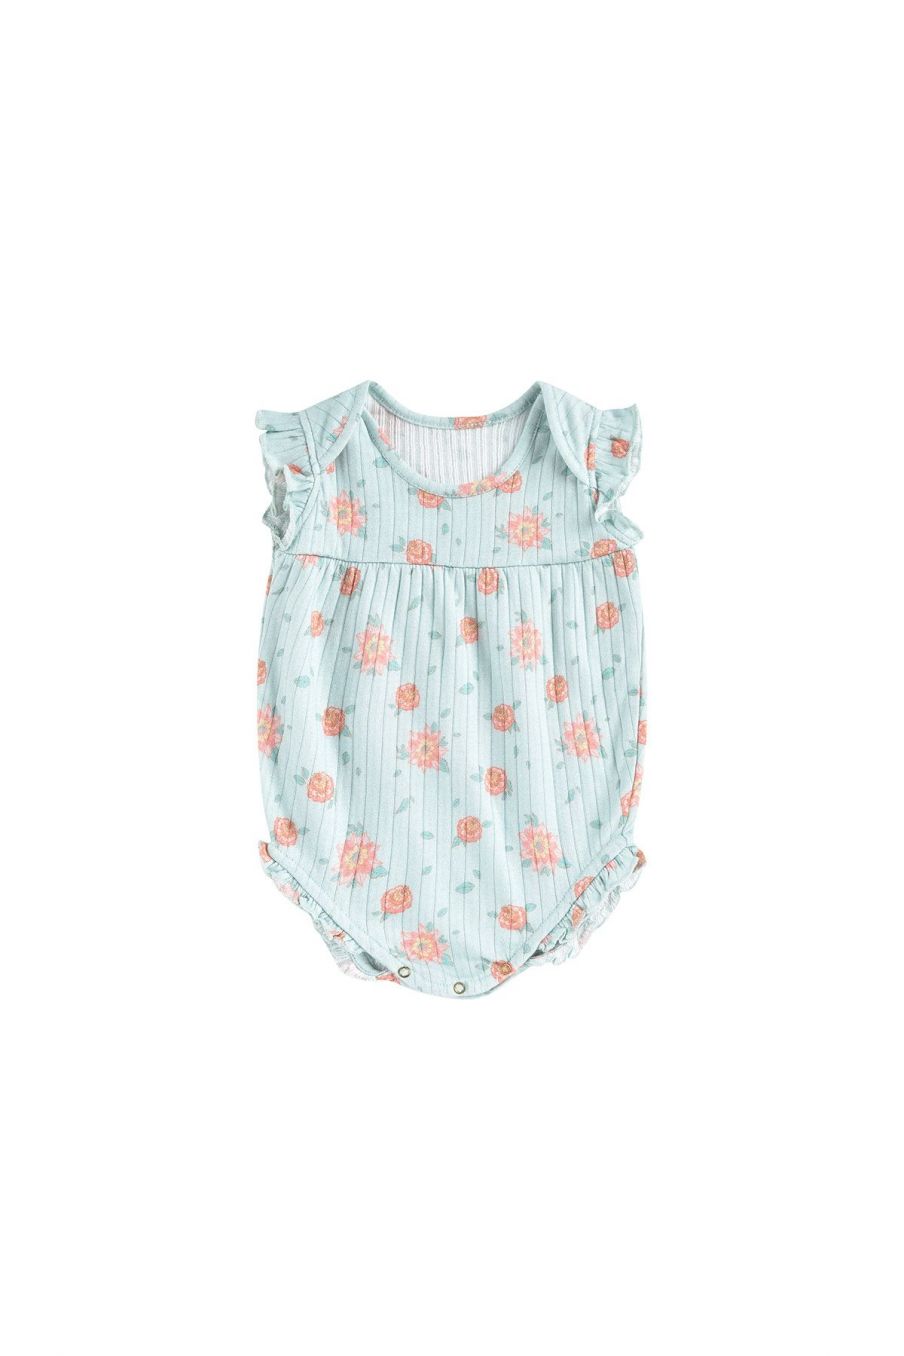 Bohemian chic - Vintage - Dress for Baby Girl → Louise Misha